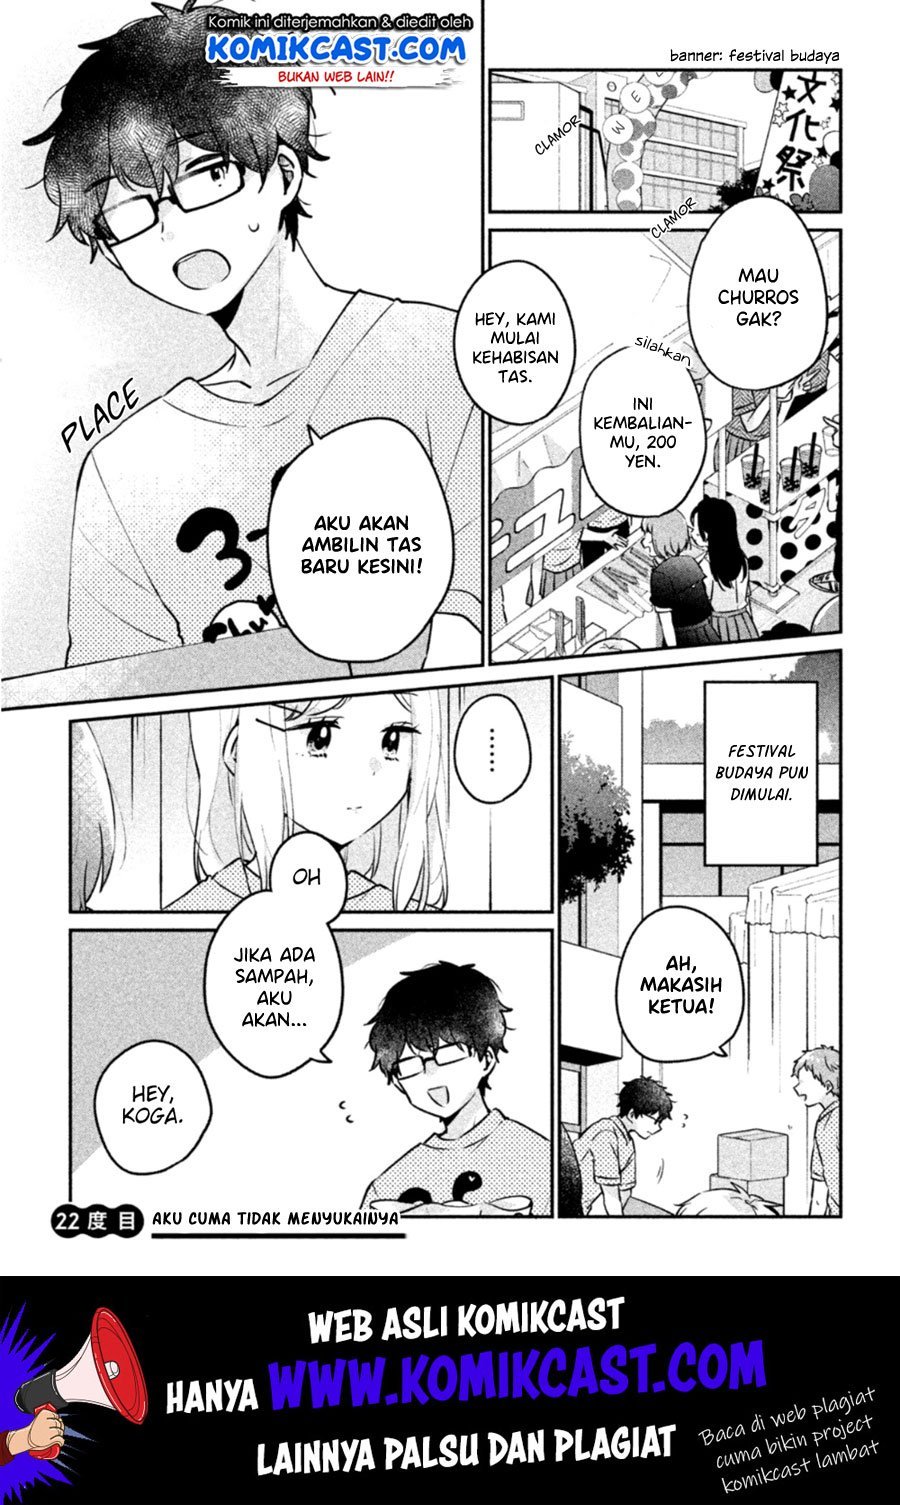 It’s Not Meguro-san’s First Time Chapter 22